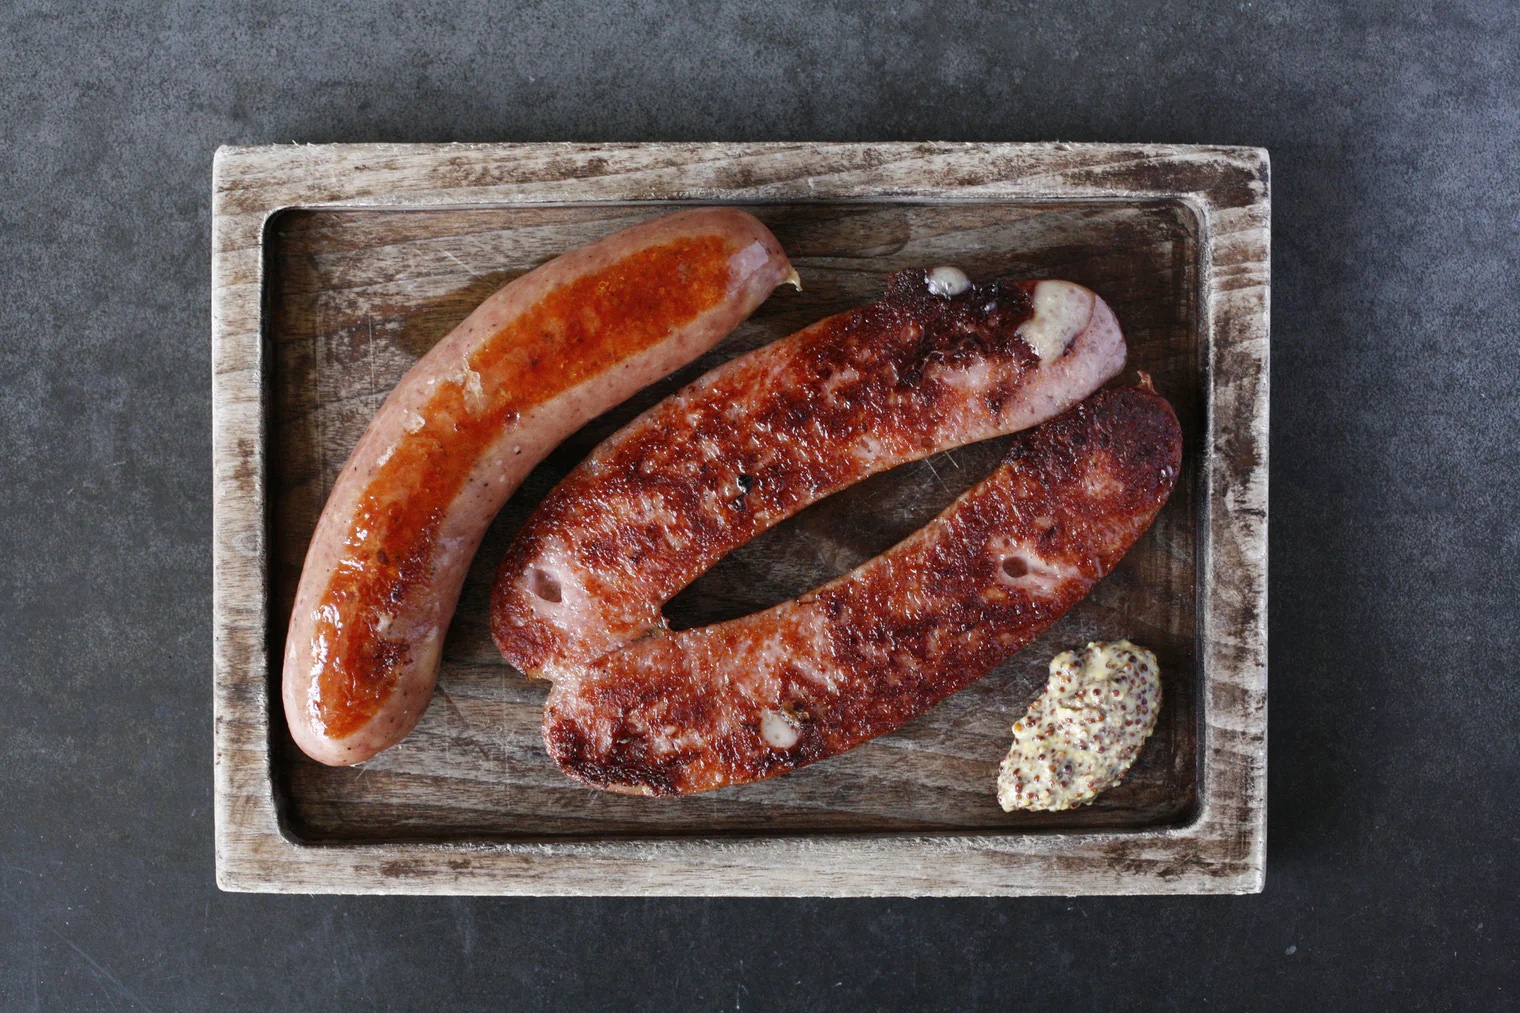 A wood platter of three half sausage links, pan-fried and browned, next to a dollop of grainy mustard.